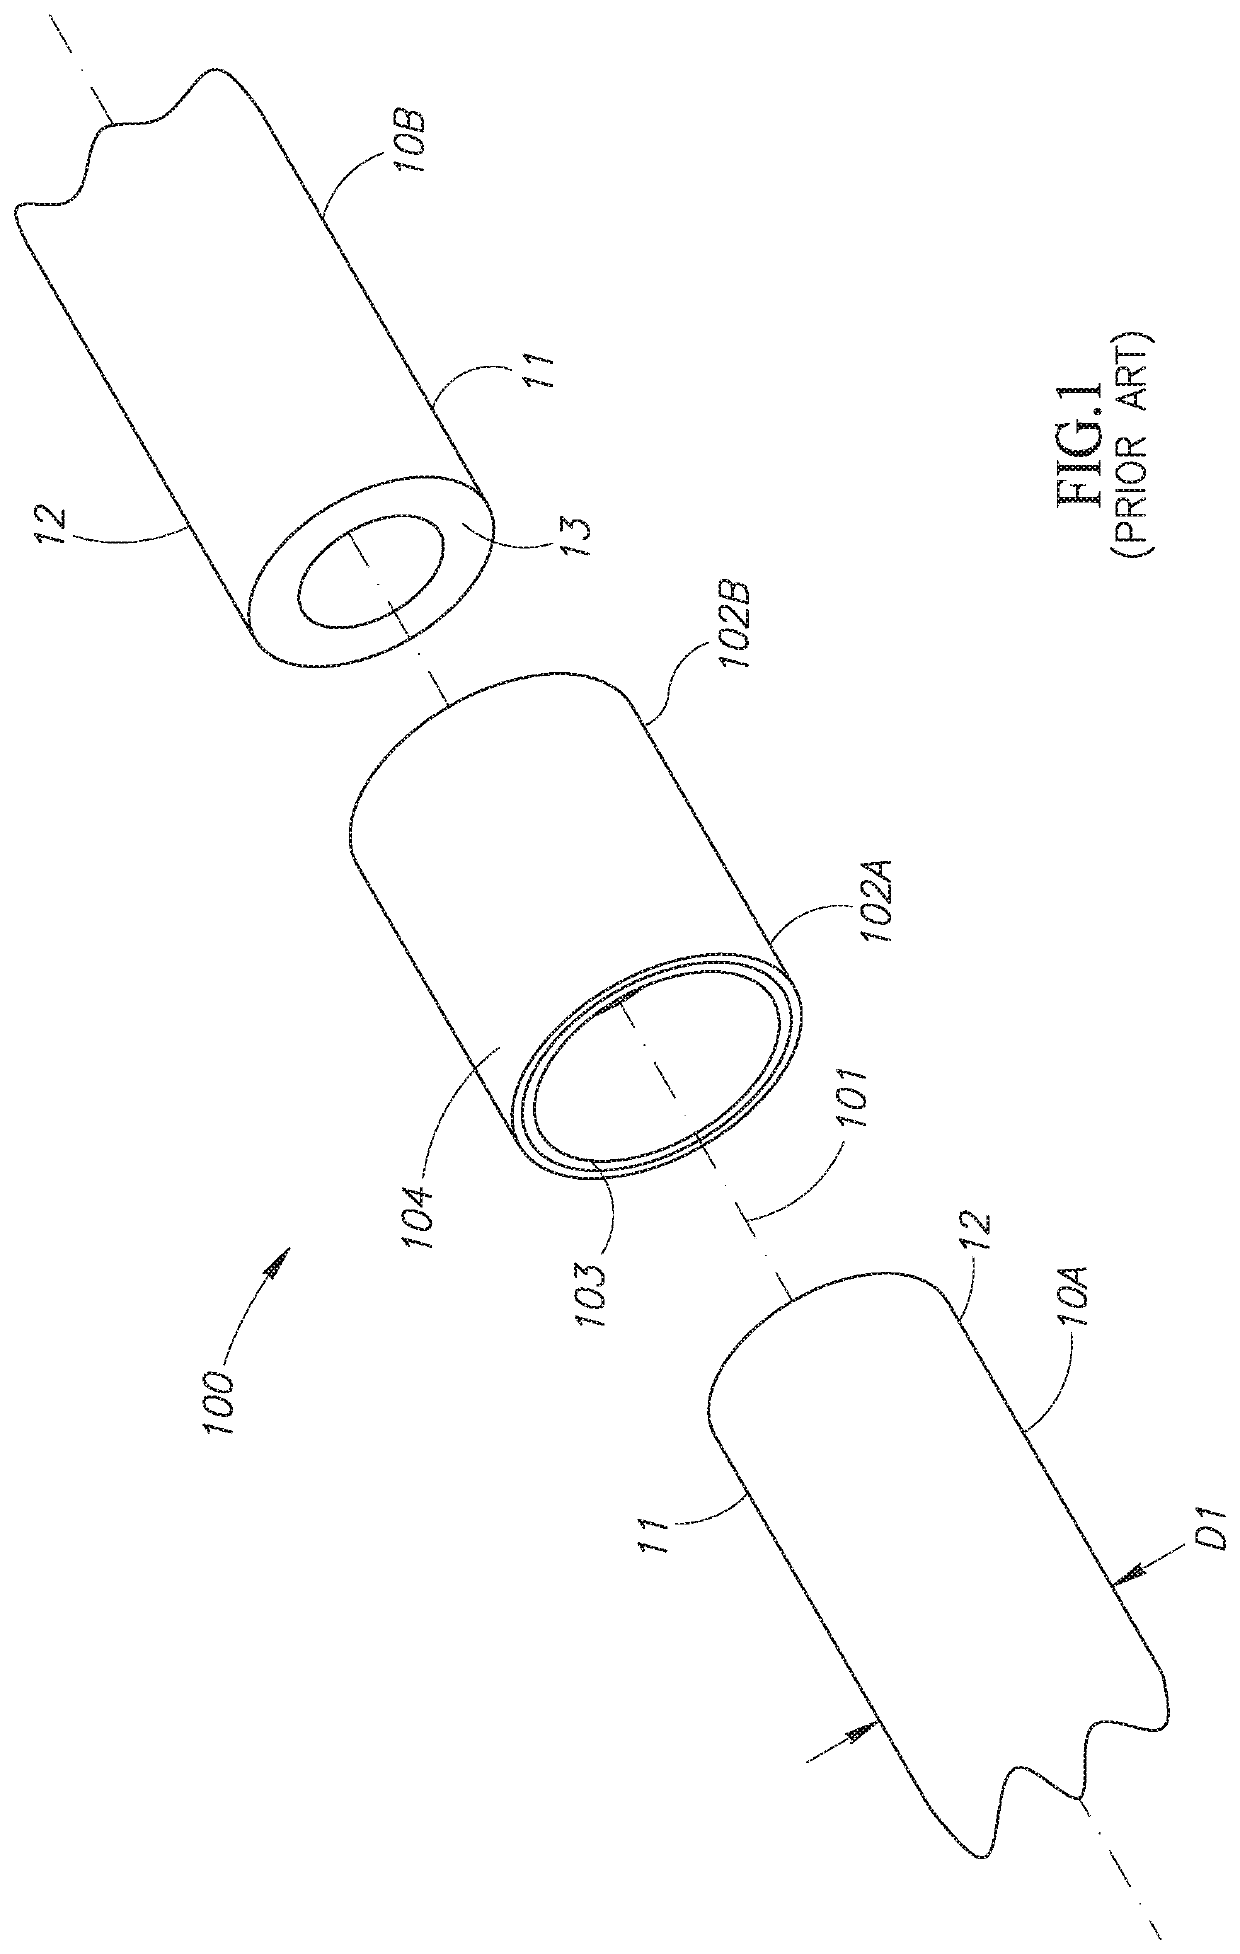 Induction weldable pipe connector having thermally insulated induction weldable socket mouth rims